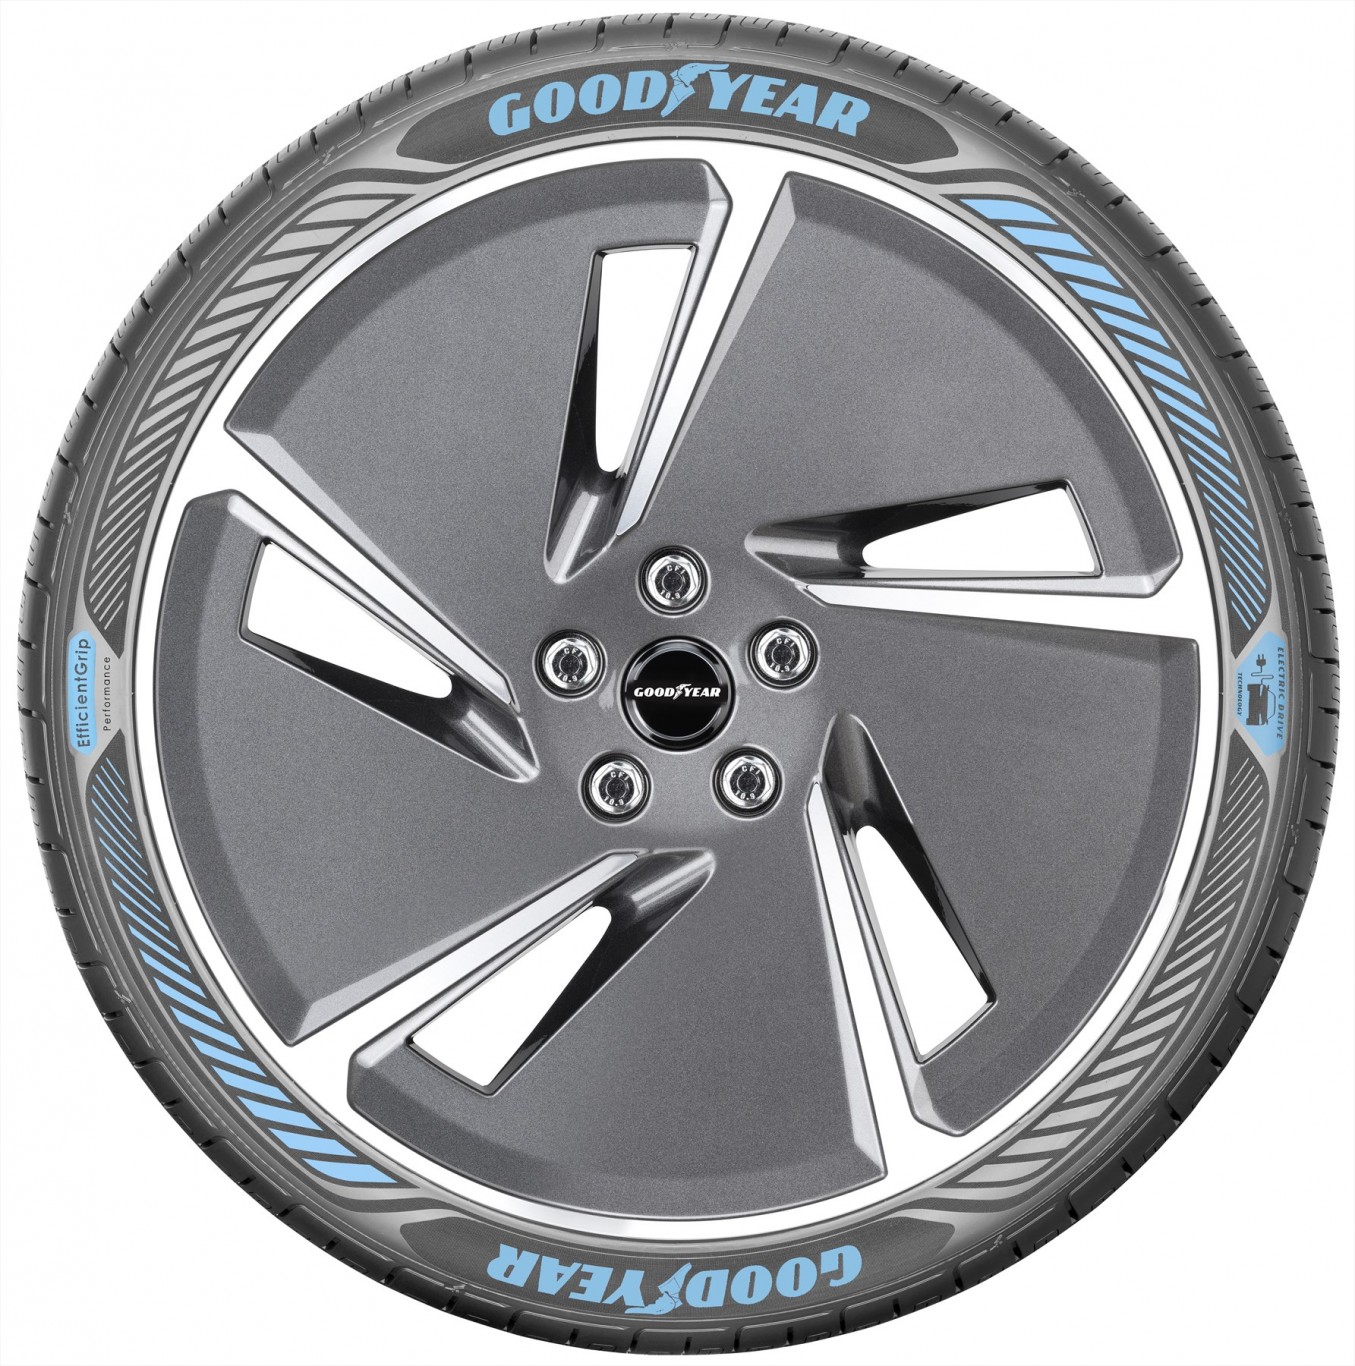 Goodyear Presents New Tyre Technology Designed to Advance the Performance of Electric Vehicles